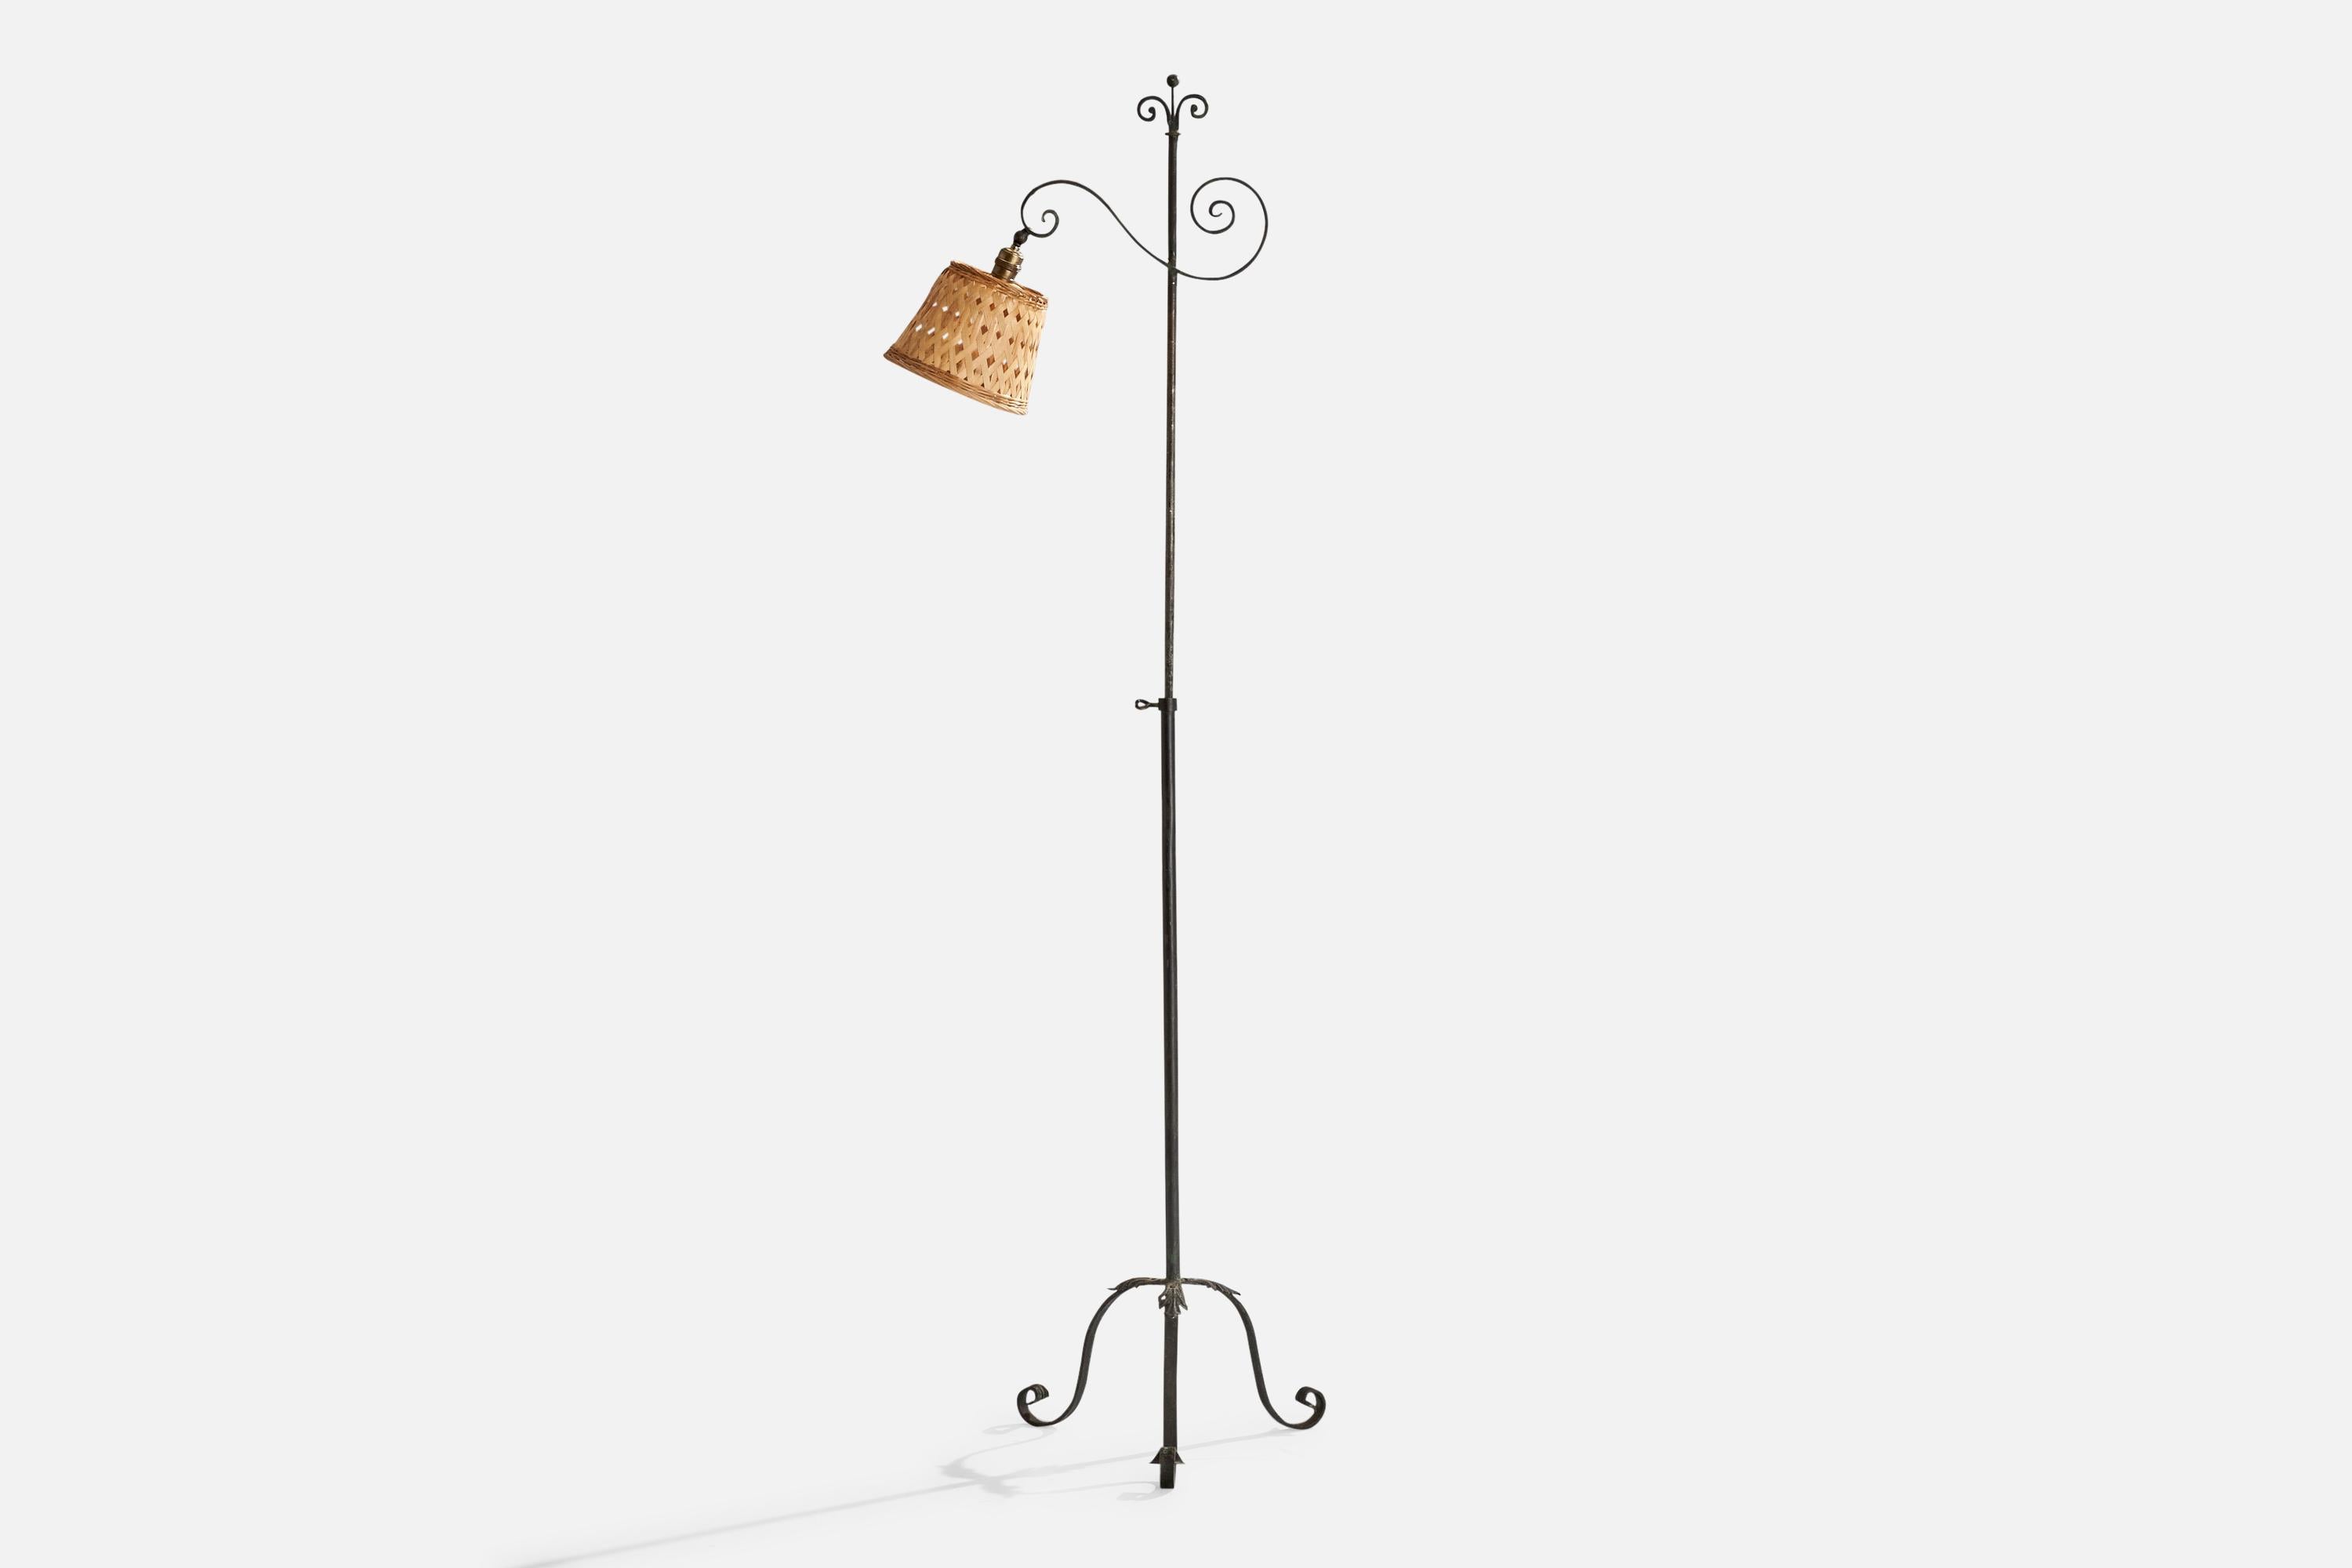 An adjustable wrought iron and beige fabric floor lamp, variation of model 15101, designed by Harald Notini and produced by Böhlmarks, Sweden, 1930s.

Dimensions variable 
Overall Dimensions (inches): 62.75” H x 7.25” W x 25.25” D
Stated dimensions